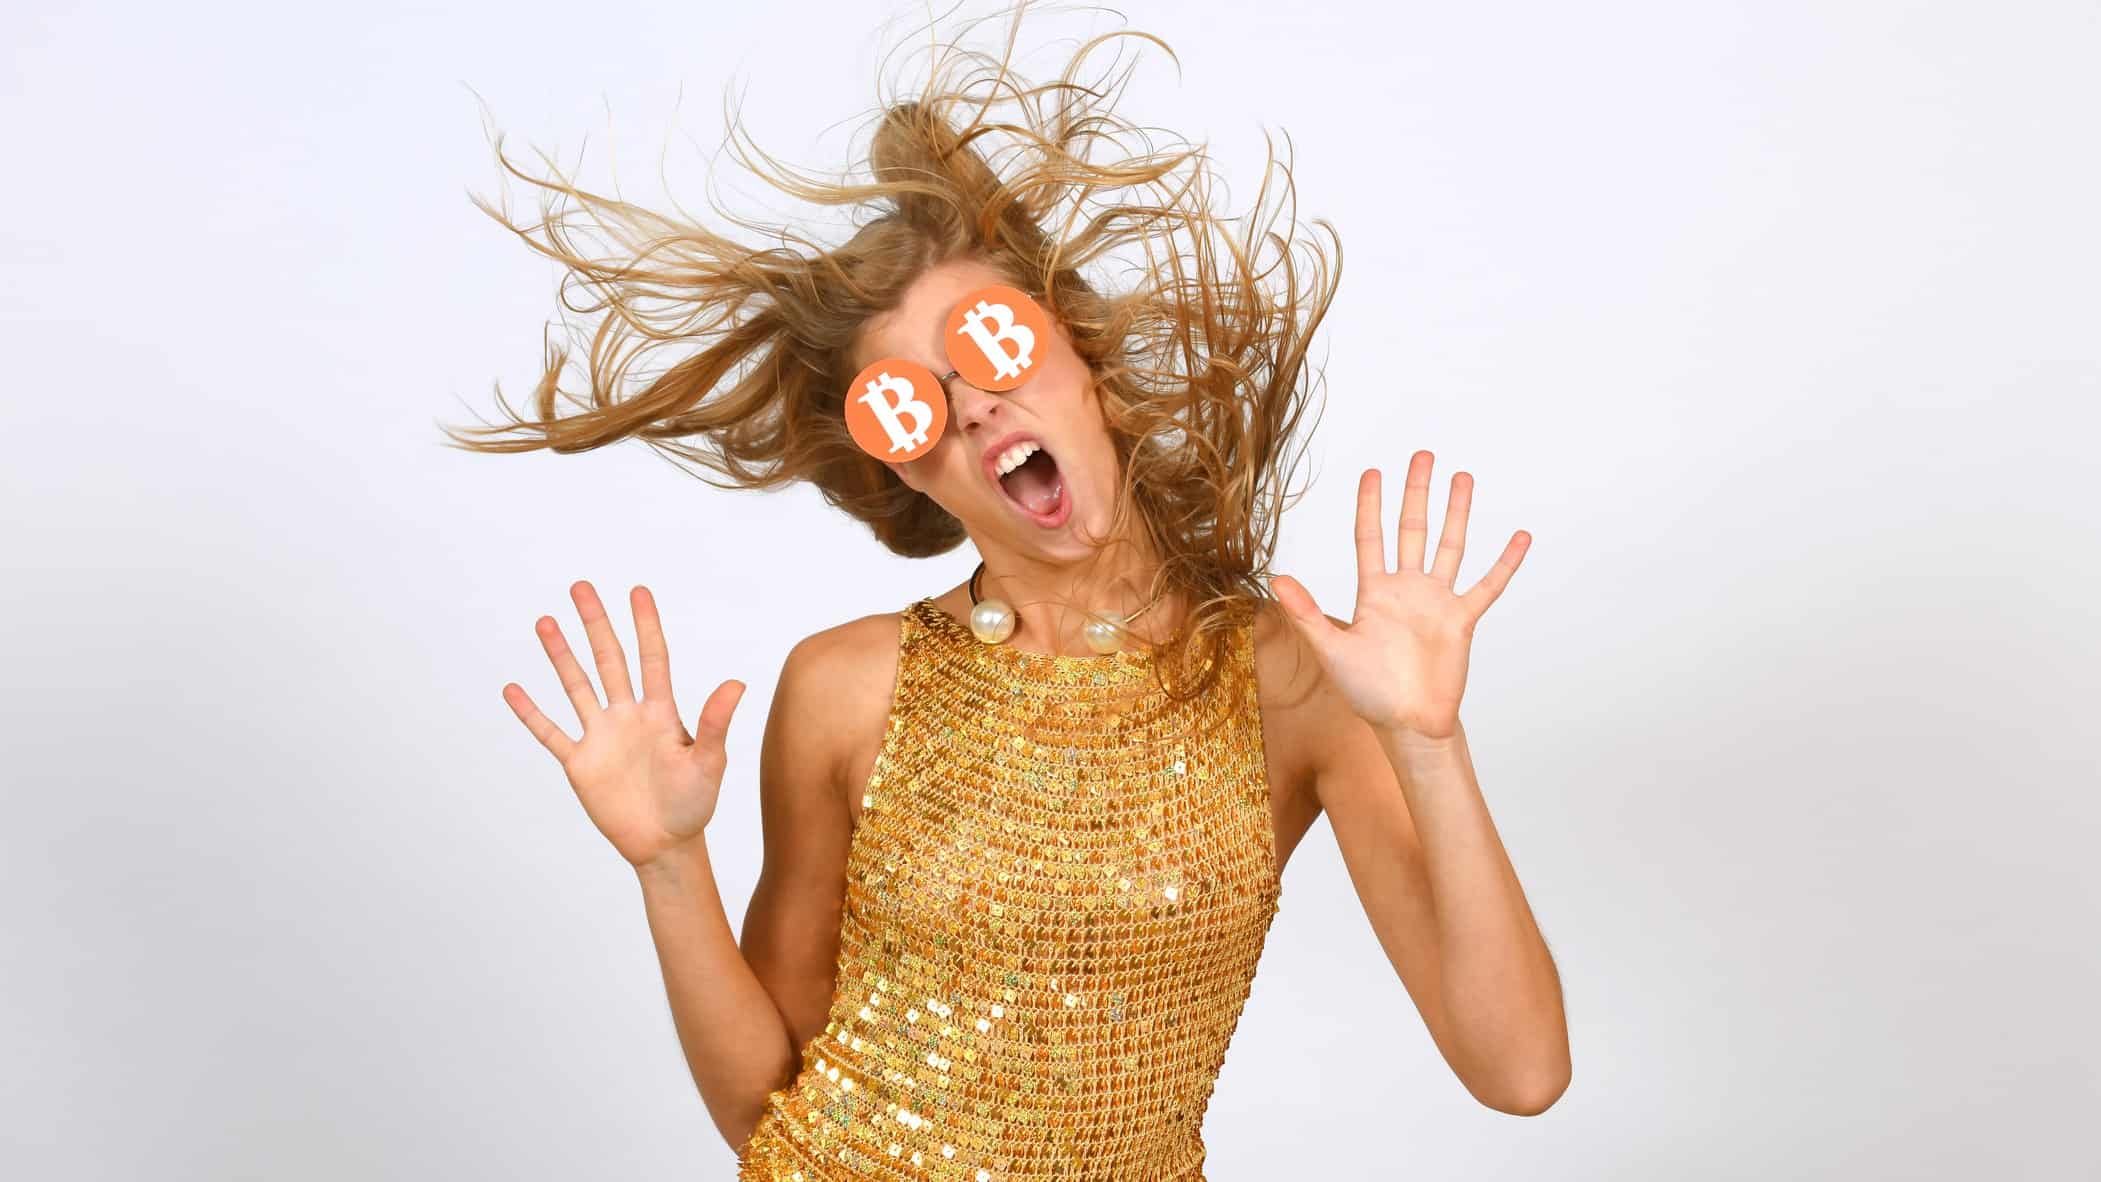 person dancing in bitcoin spectacles wearing a gold outfit with hands up.